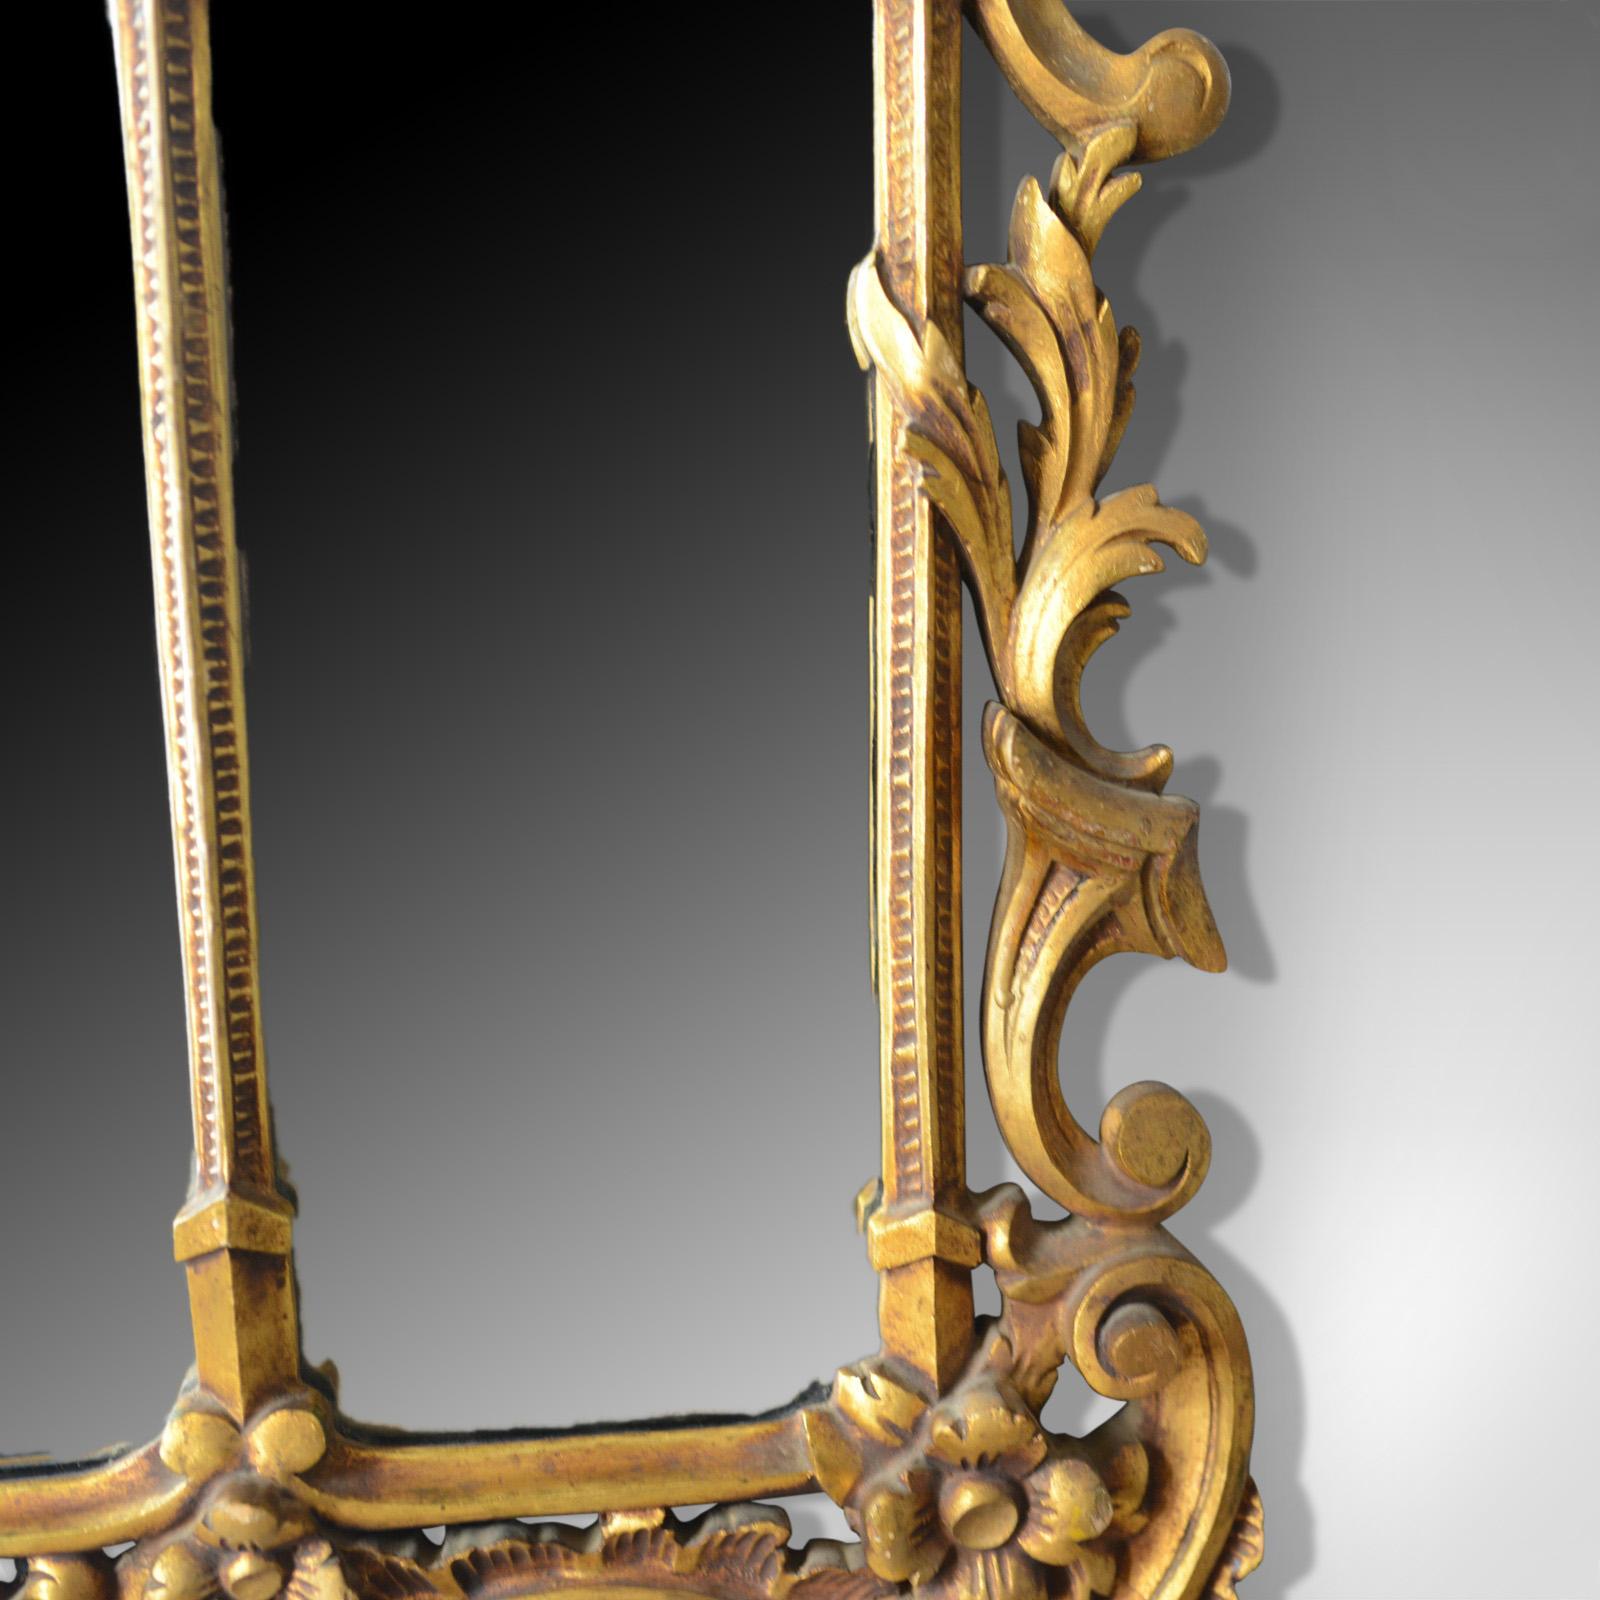 19th Century Antique Overmantel Mirror, English, Regency Revival, Giltwood, Triptych c.1900